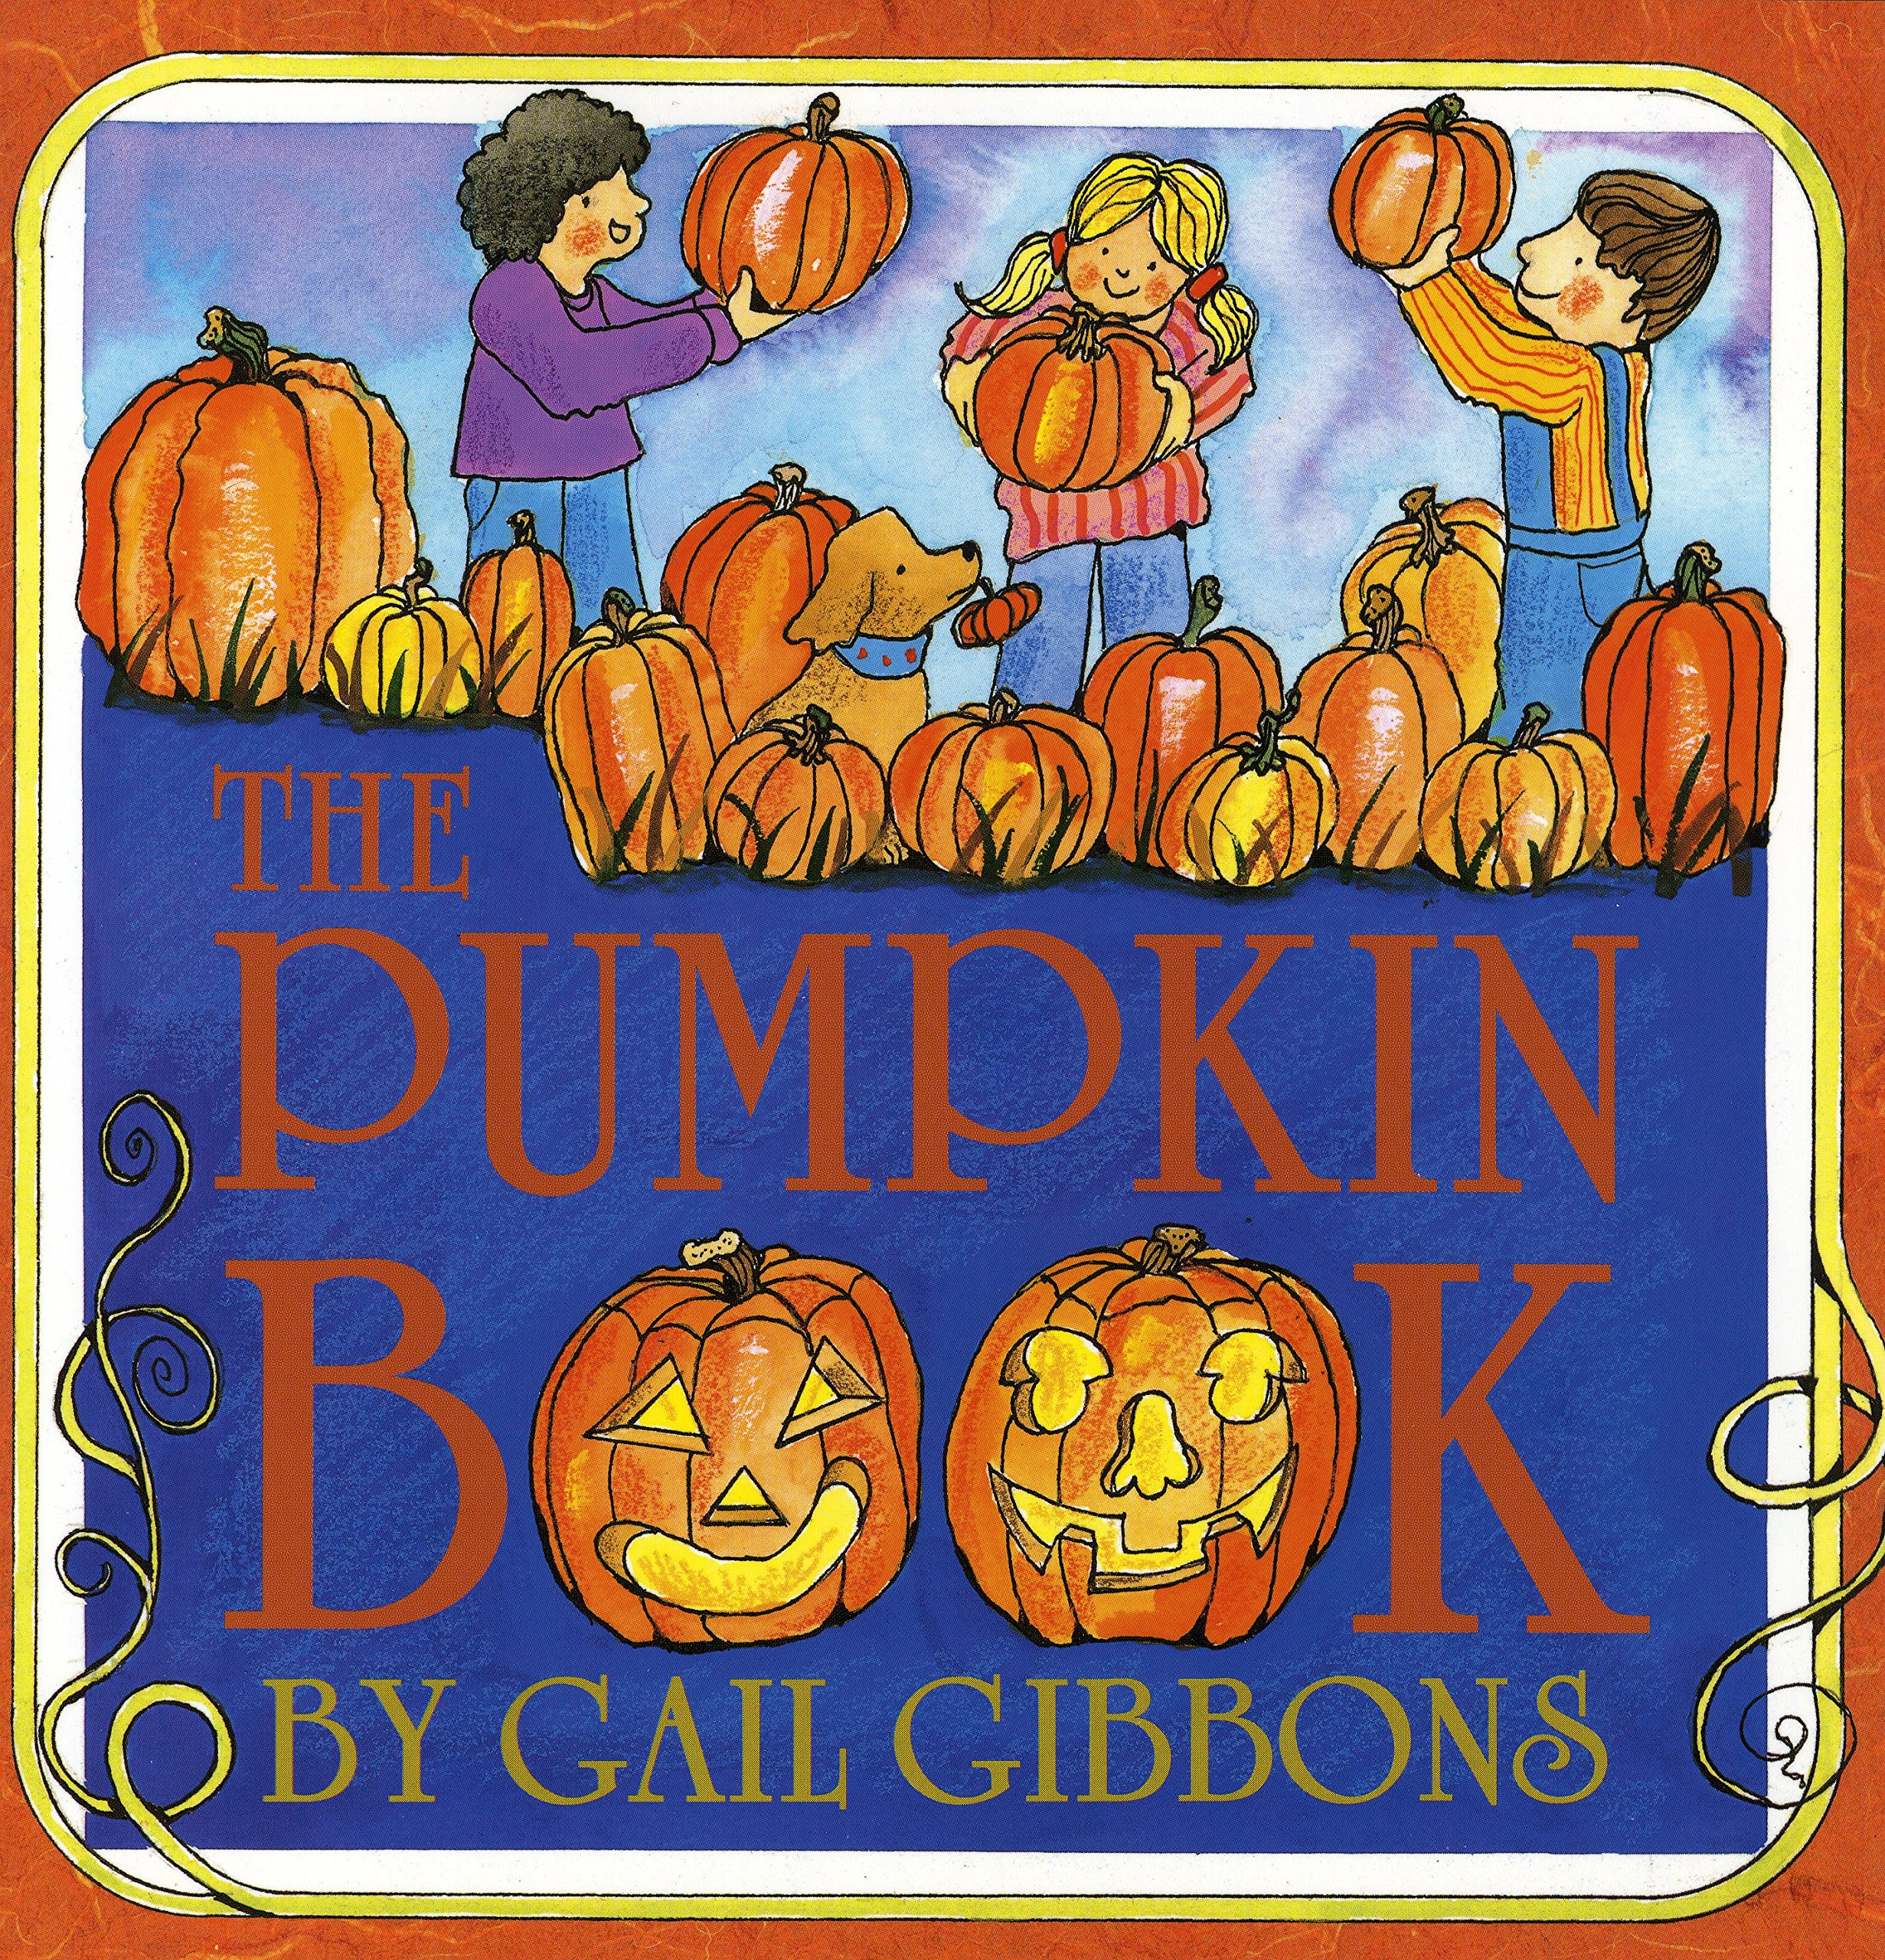 speech and language teaching concepts for The Pumpkin Book in speech therapy